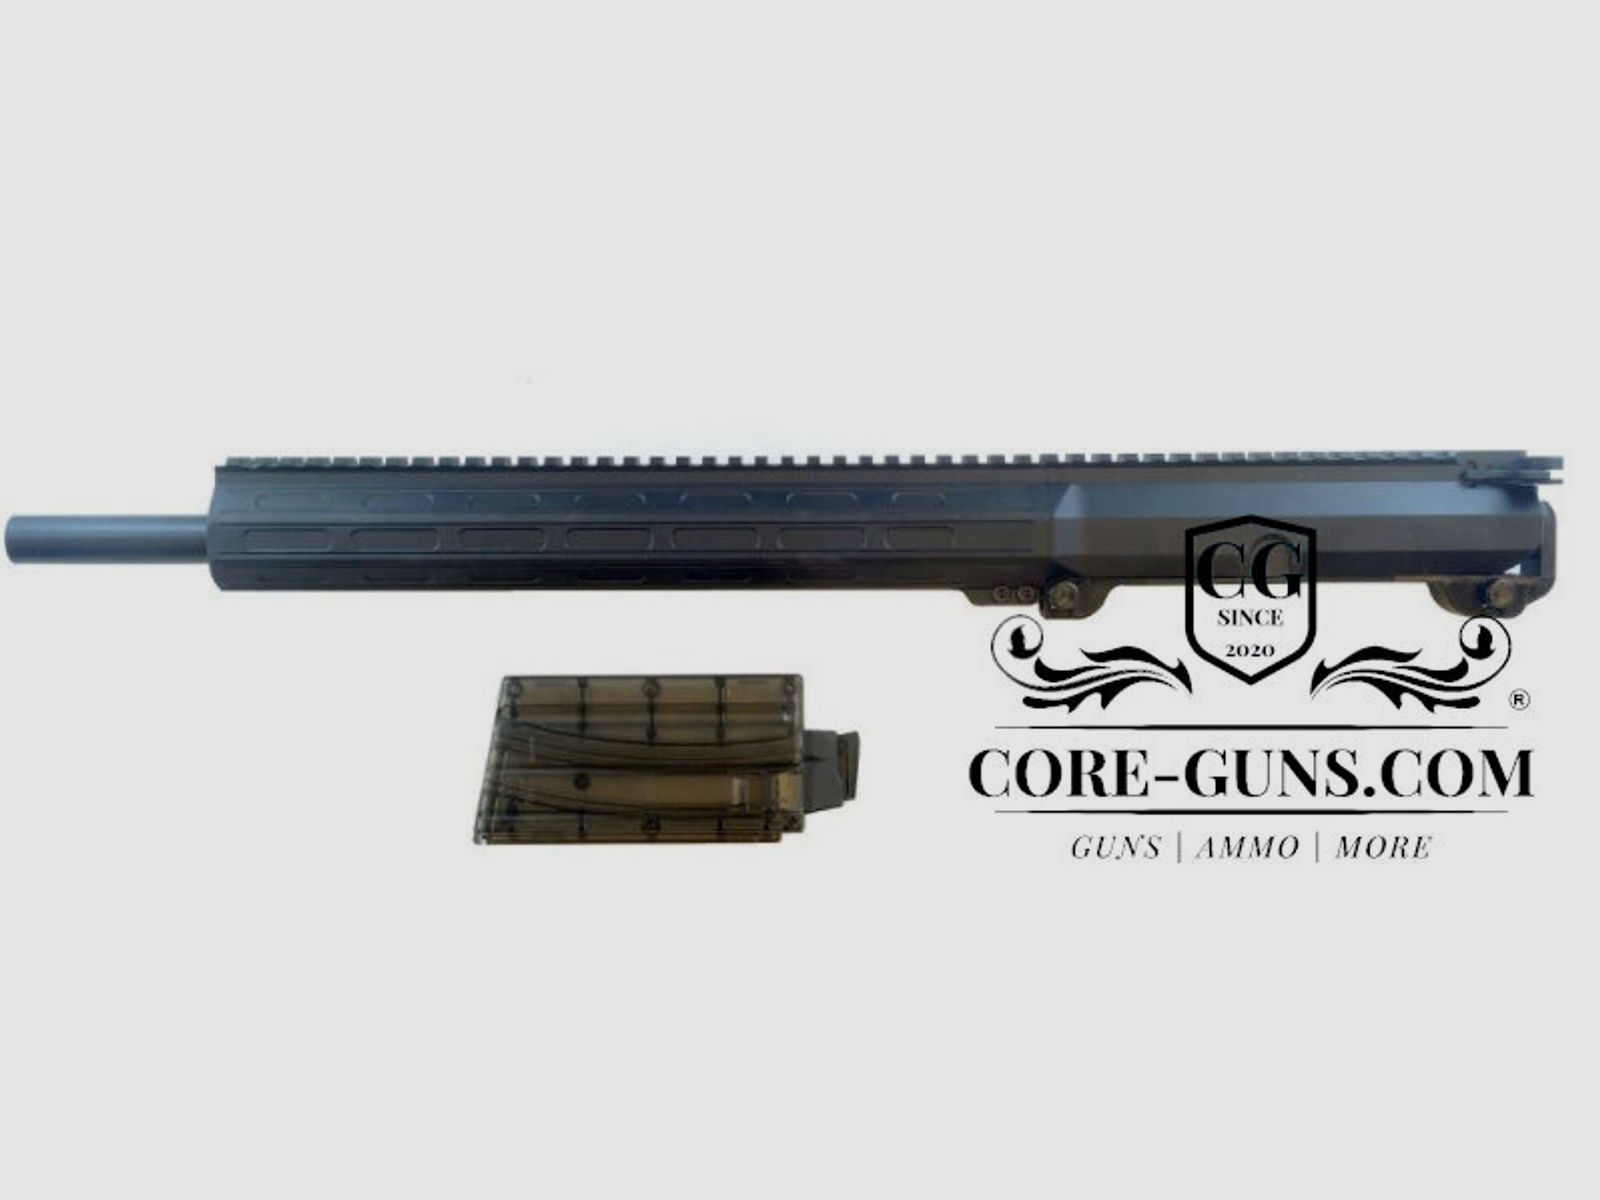 Nordic Components Upper - WECHSELSYSTEM (UPPER) .22 LFB, FÜR AR15	 Nordic Components Wechselsystem .22lr für AR15